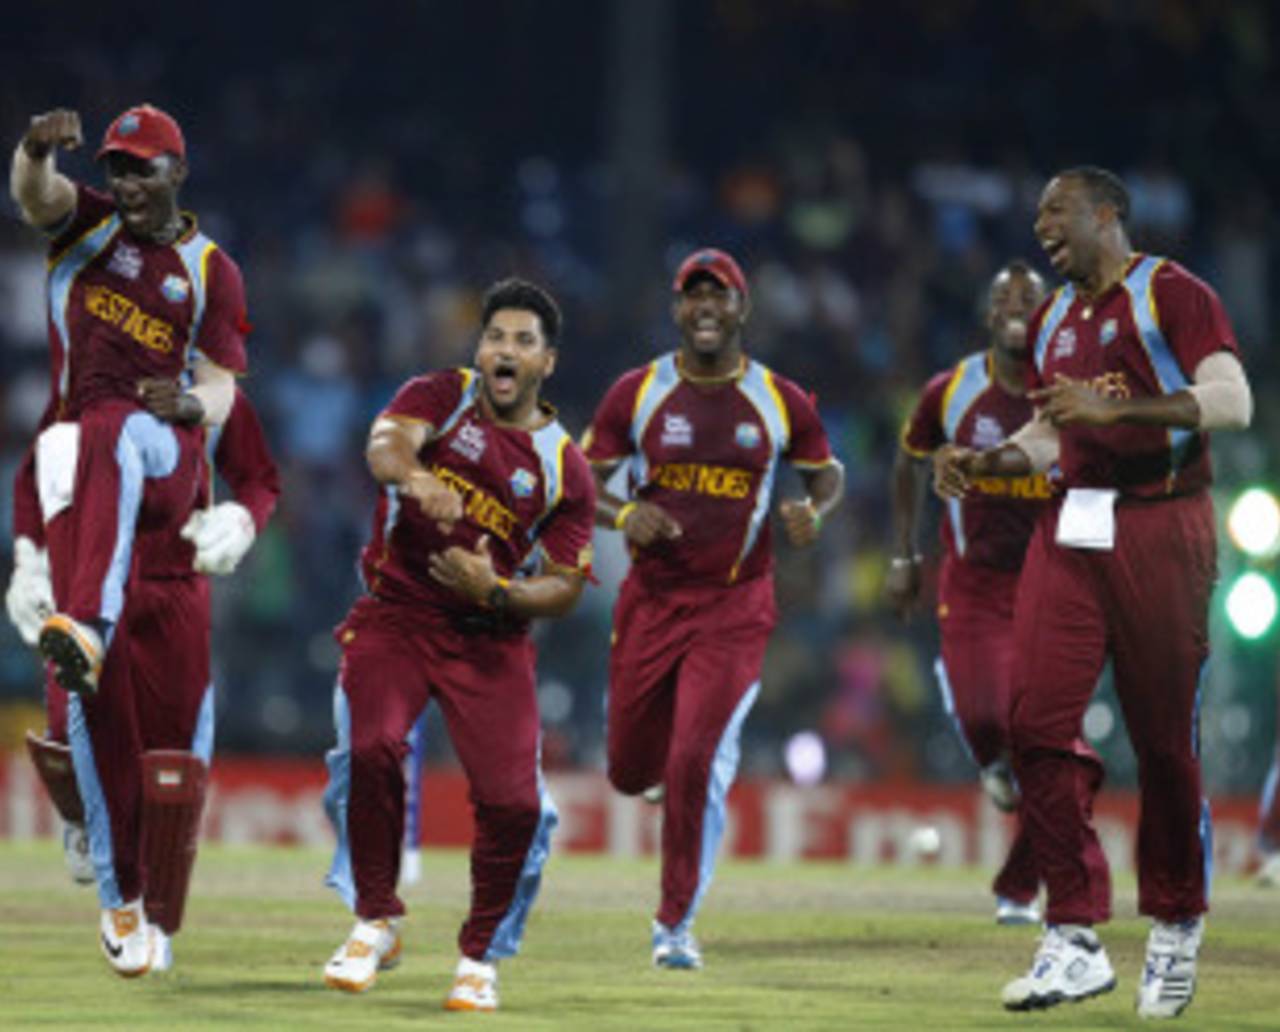 "Nothing seems to faze them. And they're showing purpose," says Clive Lloyd of the current West Indies team&nbsp;&nbsp;&bull;&nbsp;&nbsp;Associated Press